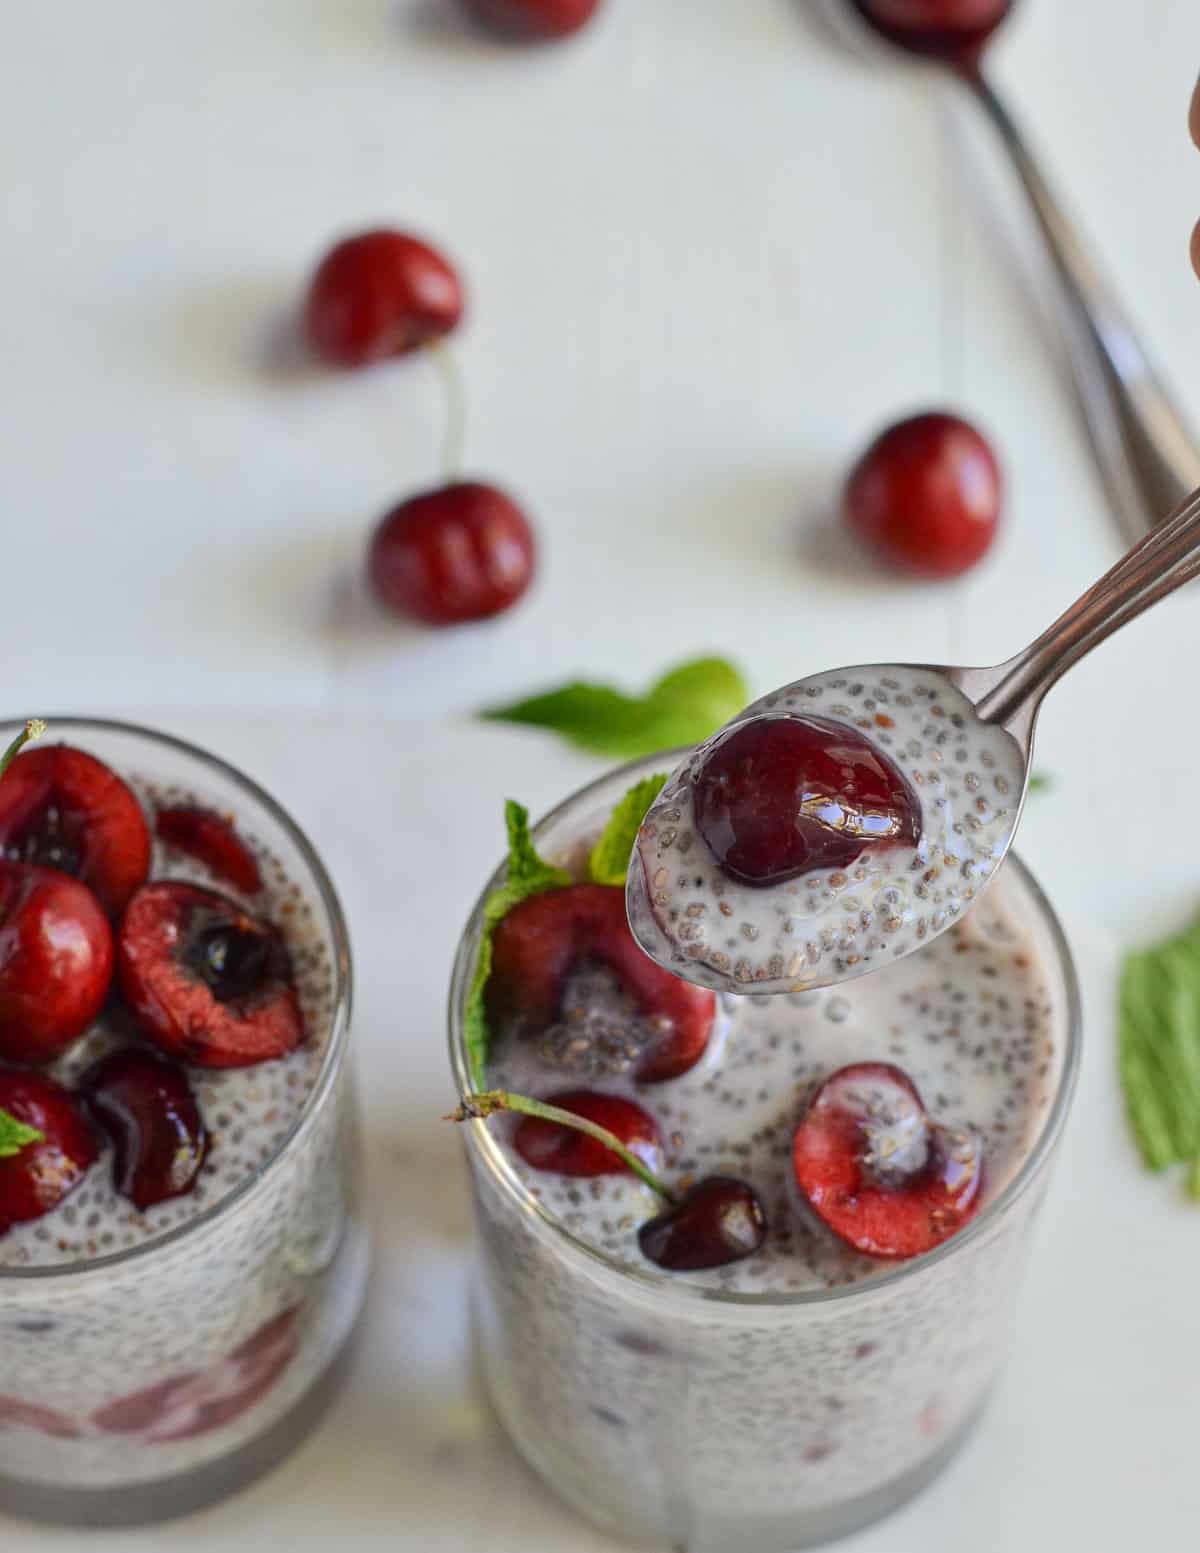 a spoonful cherry chia pudding shown in the click.